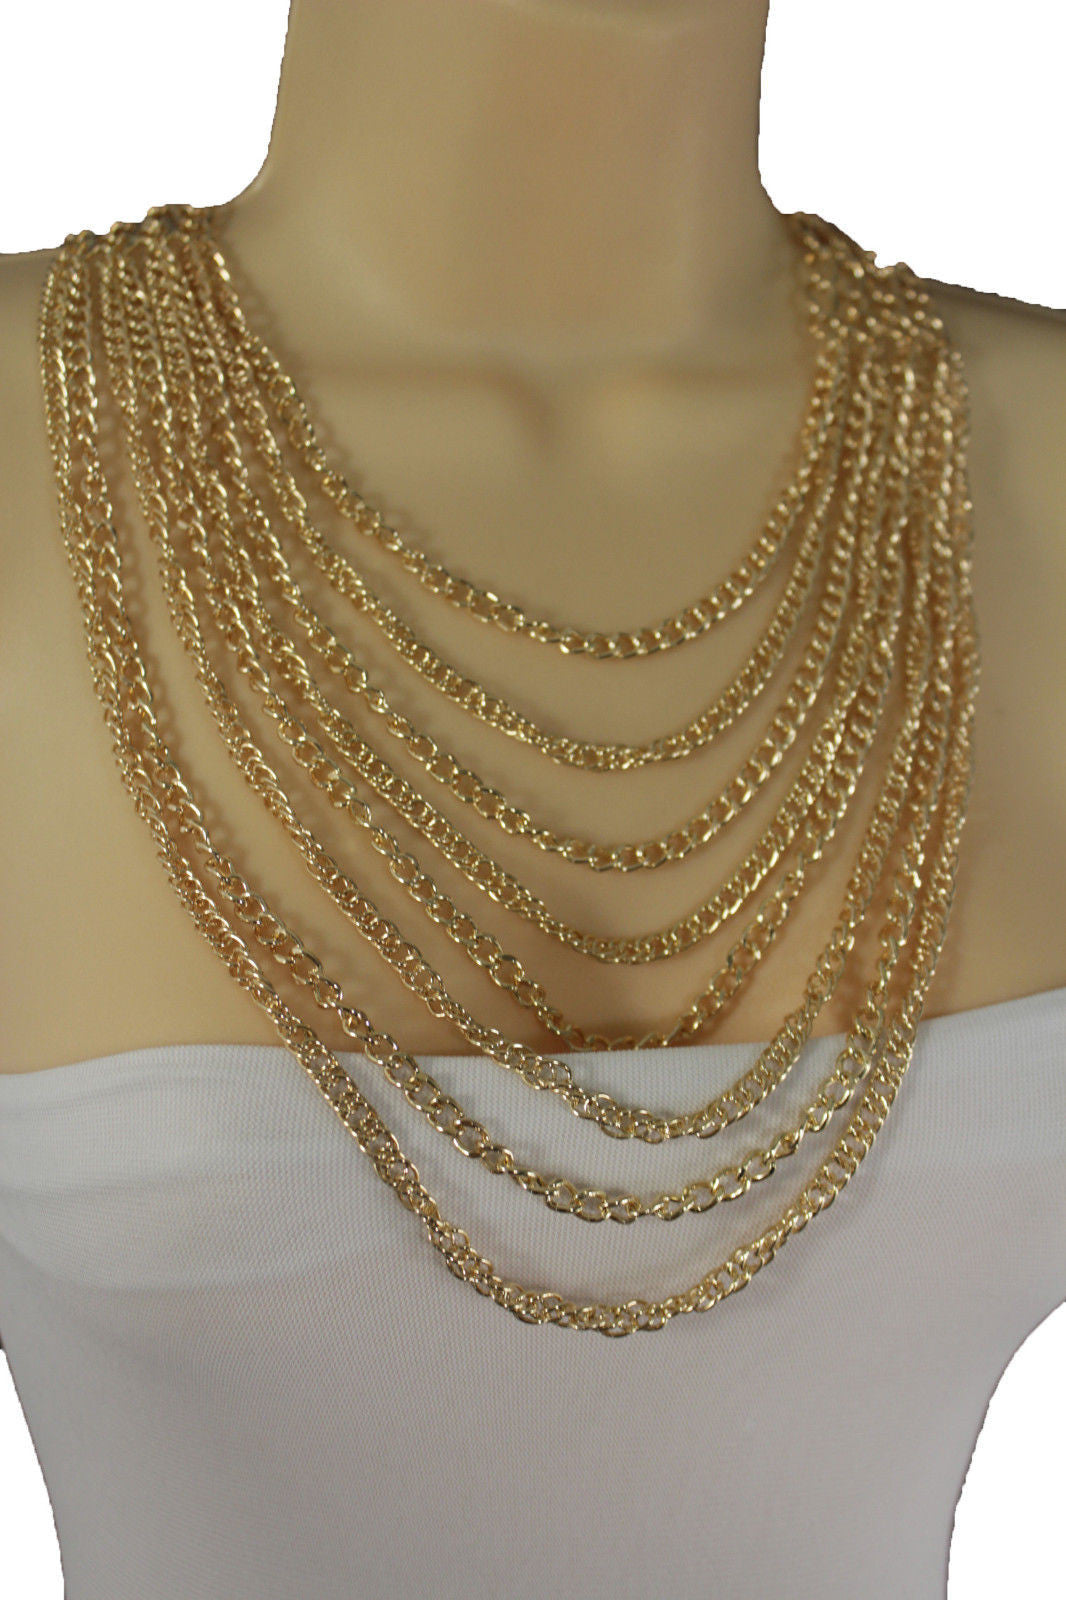 Gold Metal Chains Links 8 Strands Long Necklace New Women Fashion Jewe ...